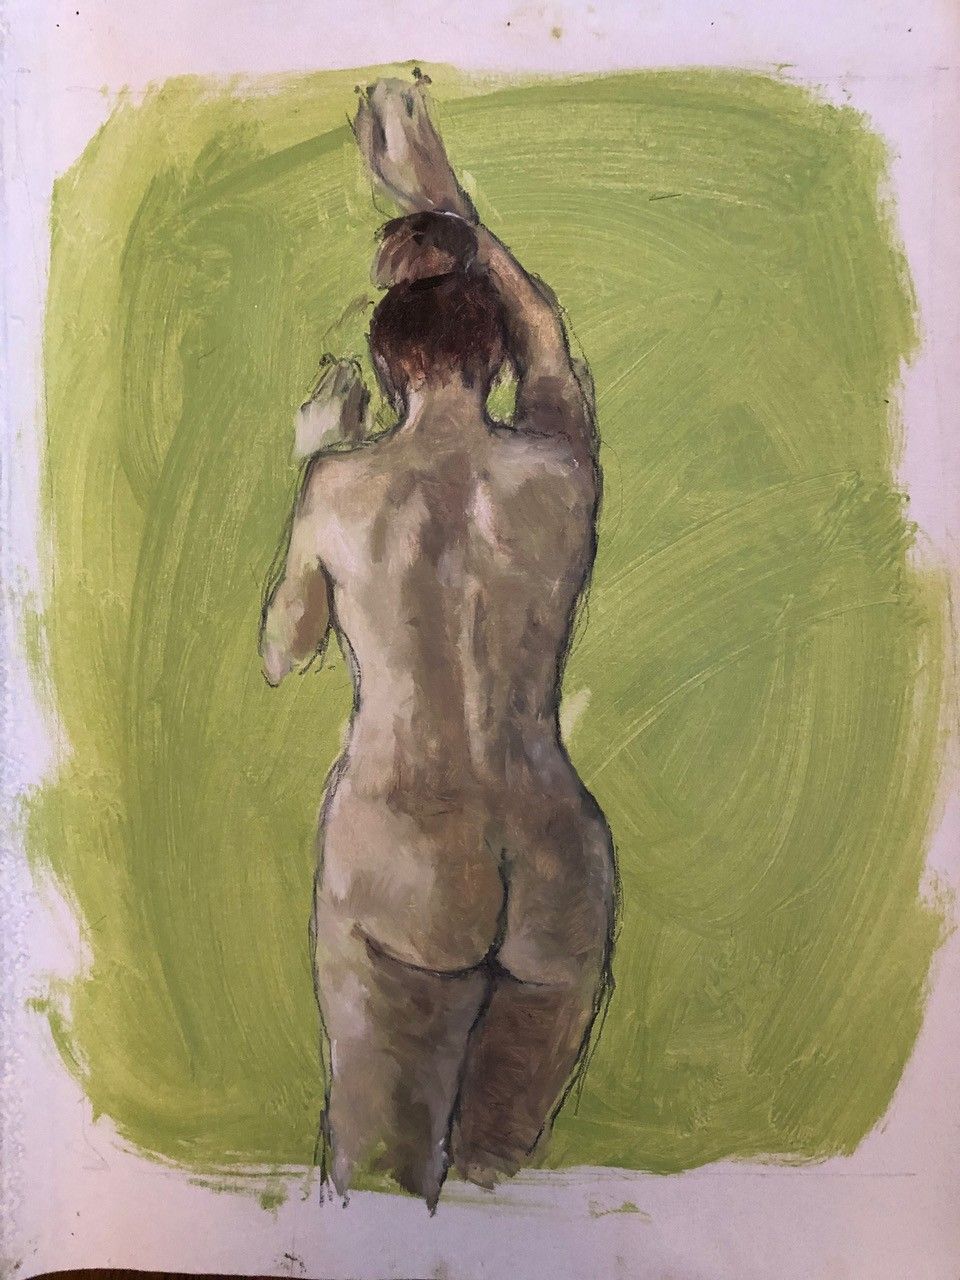 Nude in Lime by Gabrielle Moulding